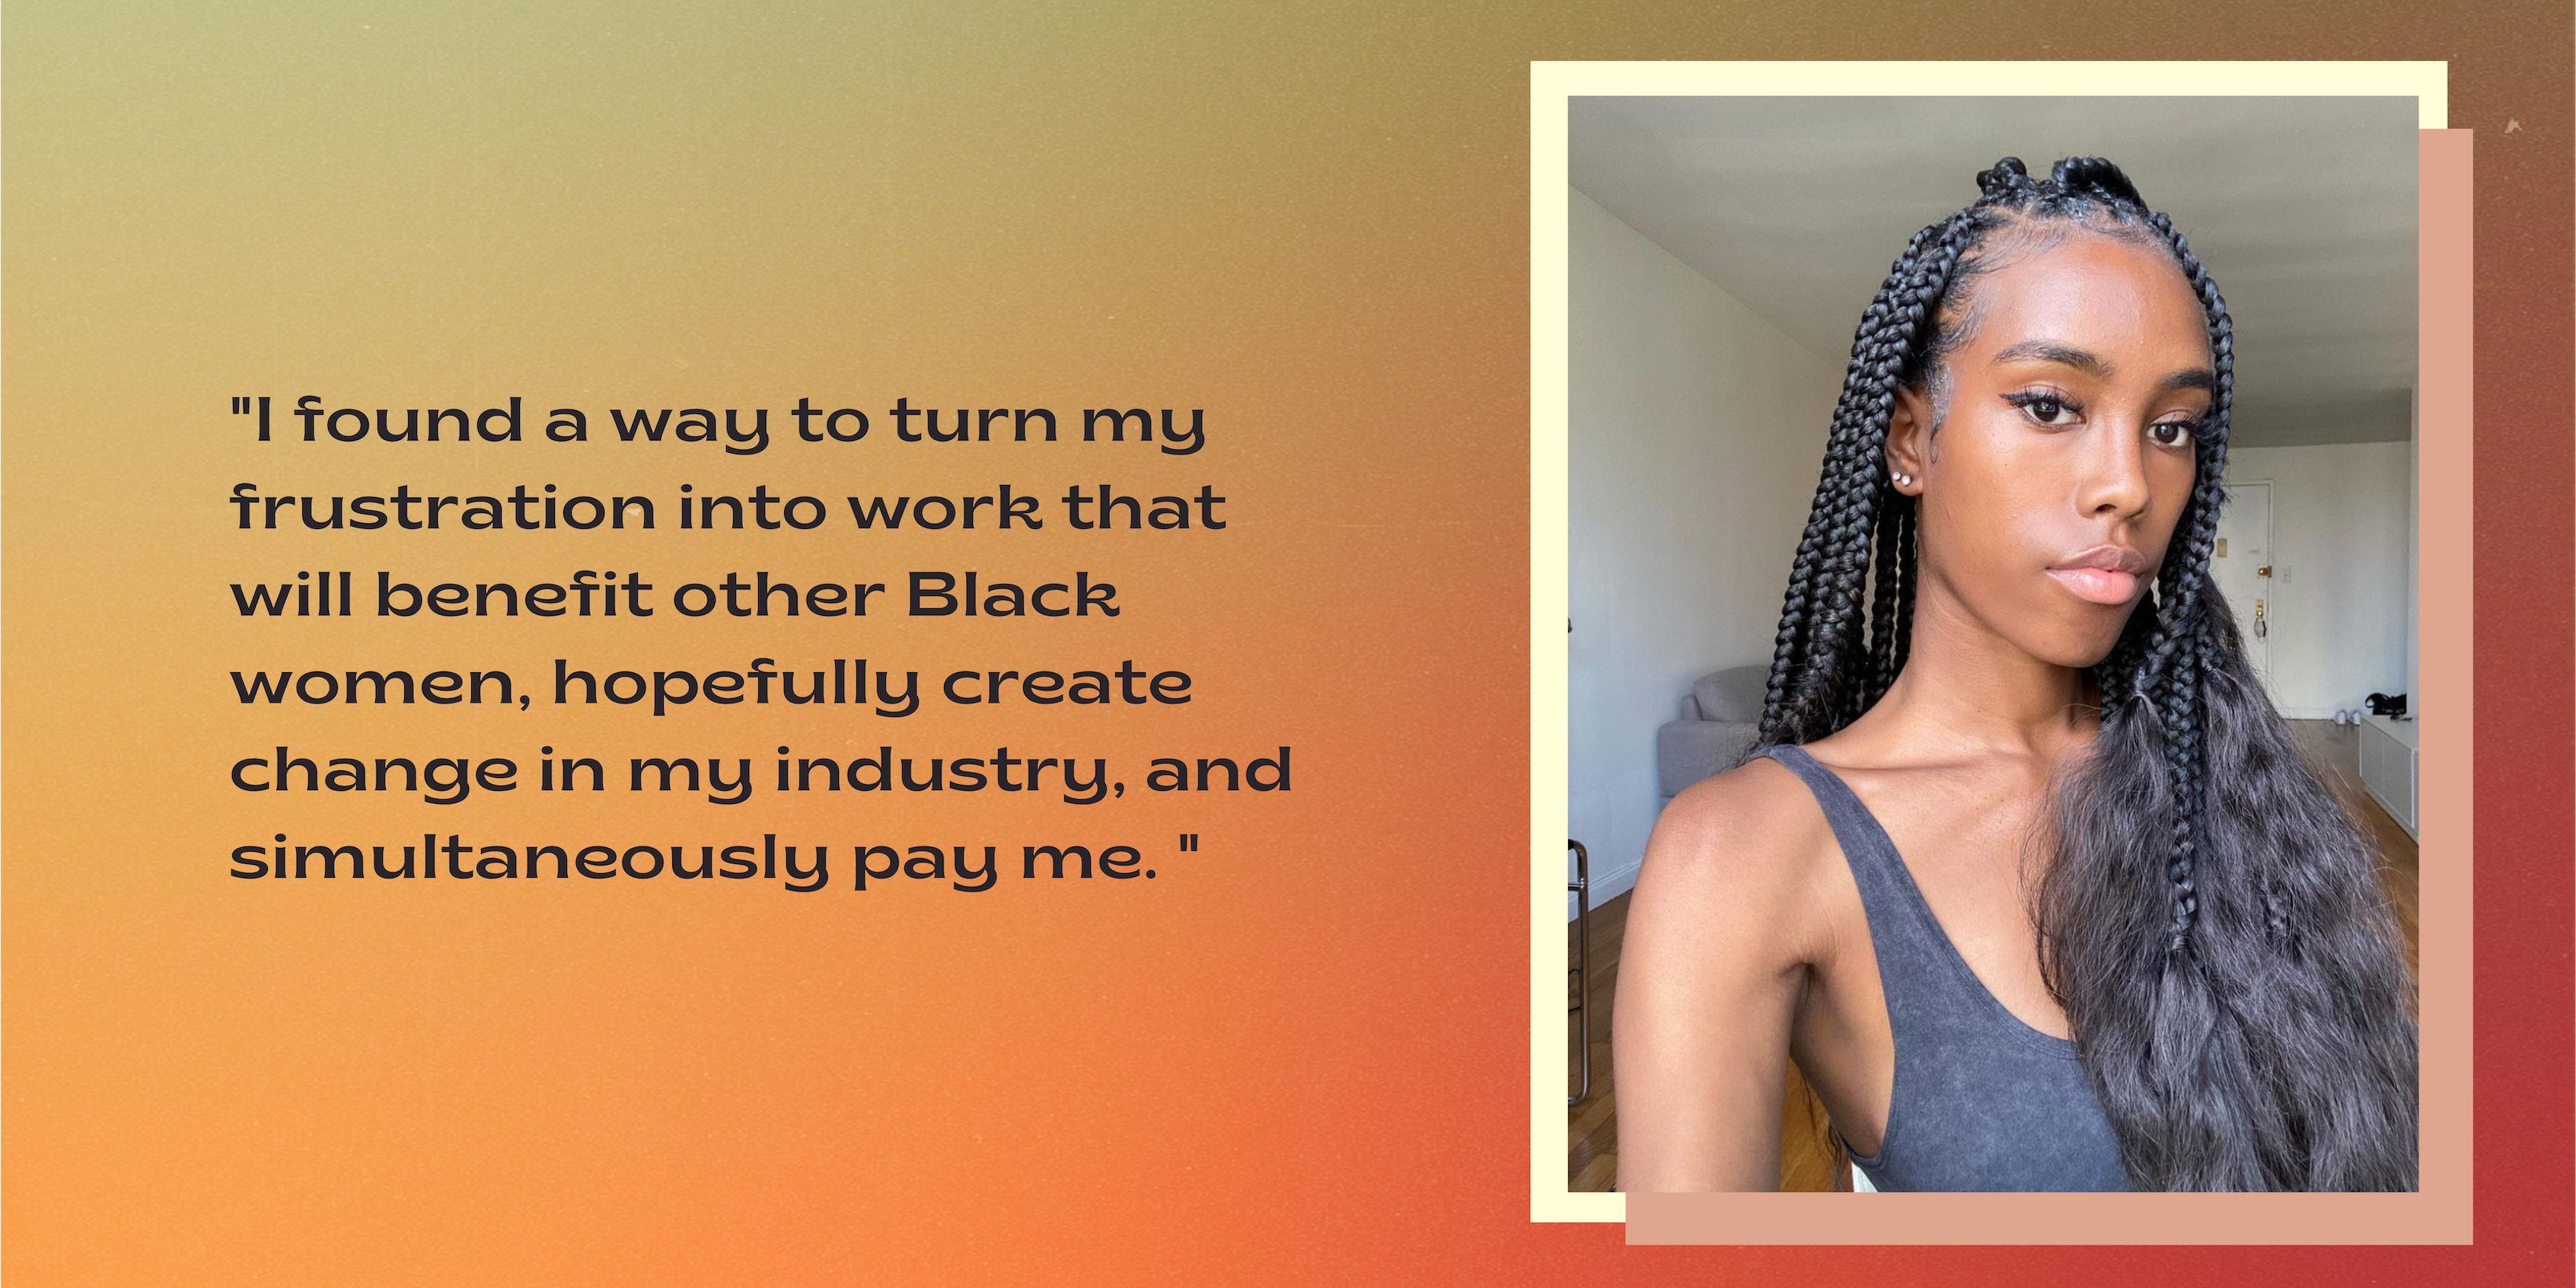 Green, orange and red background. On the left is quote in black text that says, "I found a way to turn my frustration into work that will benefit other Black women, hopefully create change in my industry, and simultaneously pay me." On the right is a photo of freelance writer Brianna Holt.